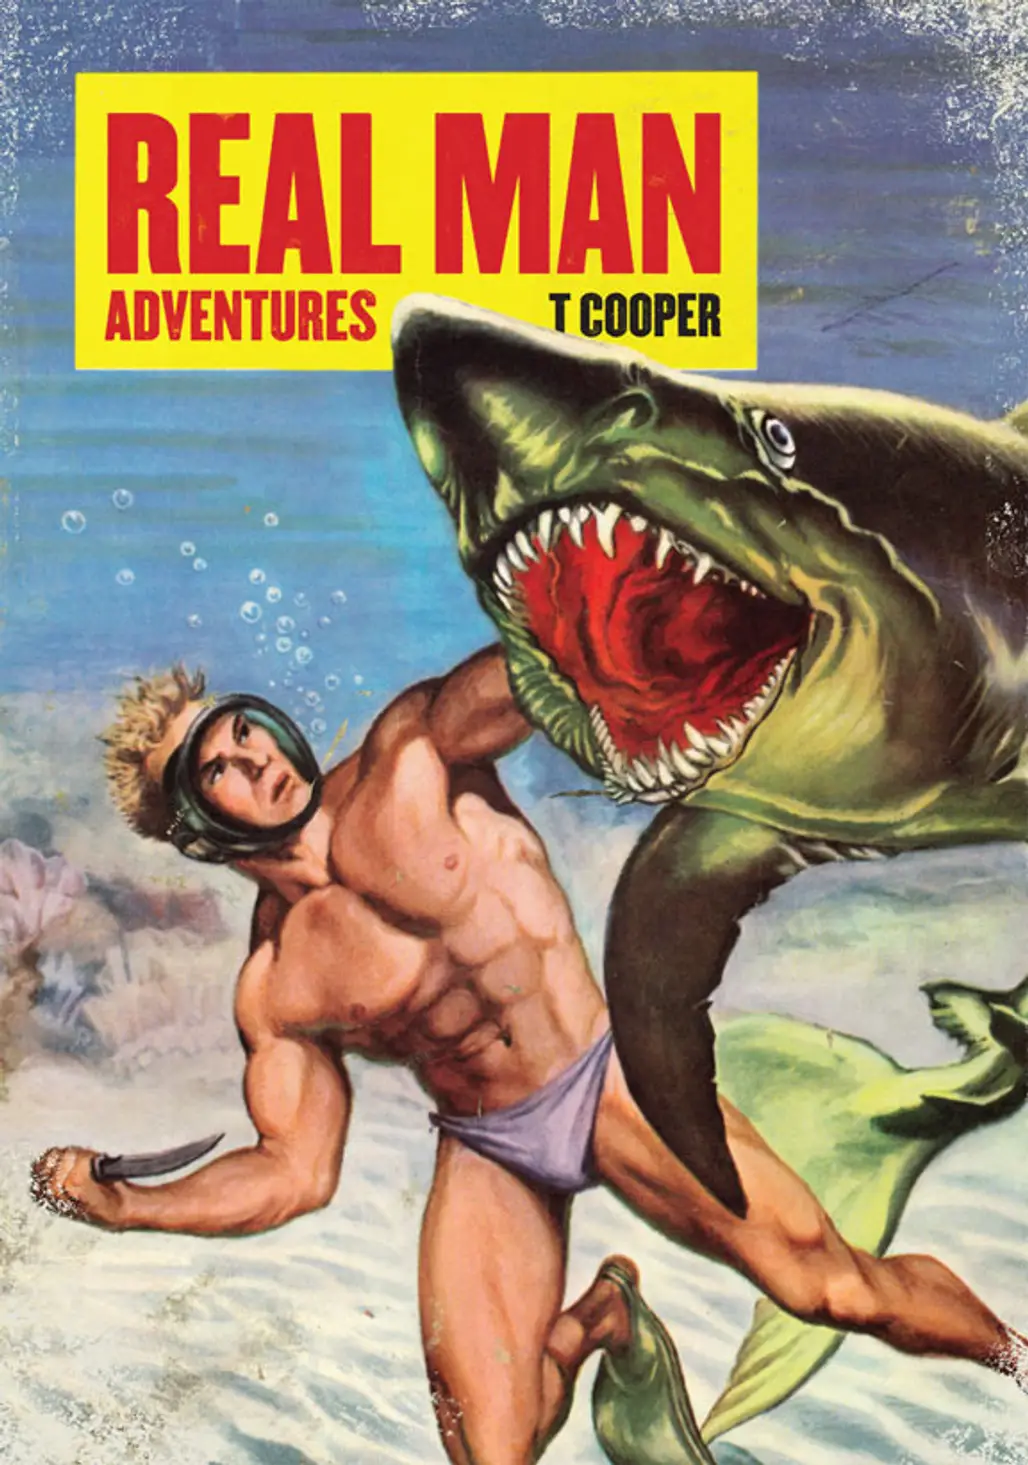 Real Man Adventures by T Cooper